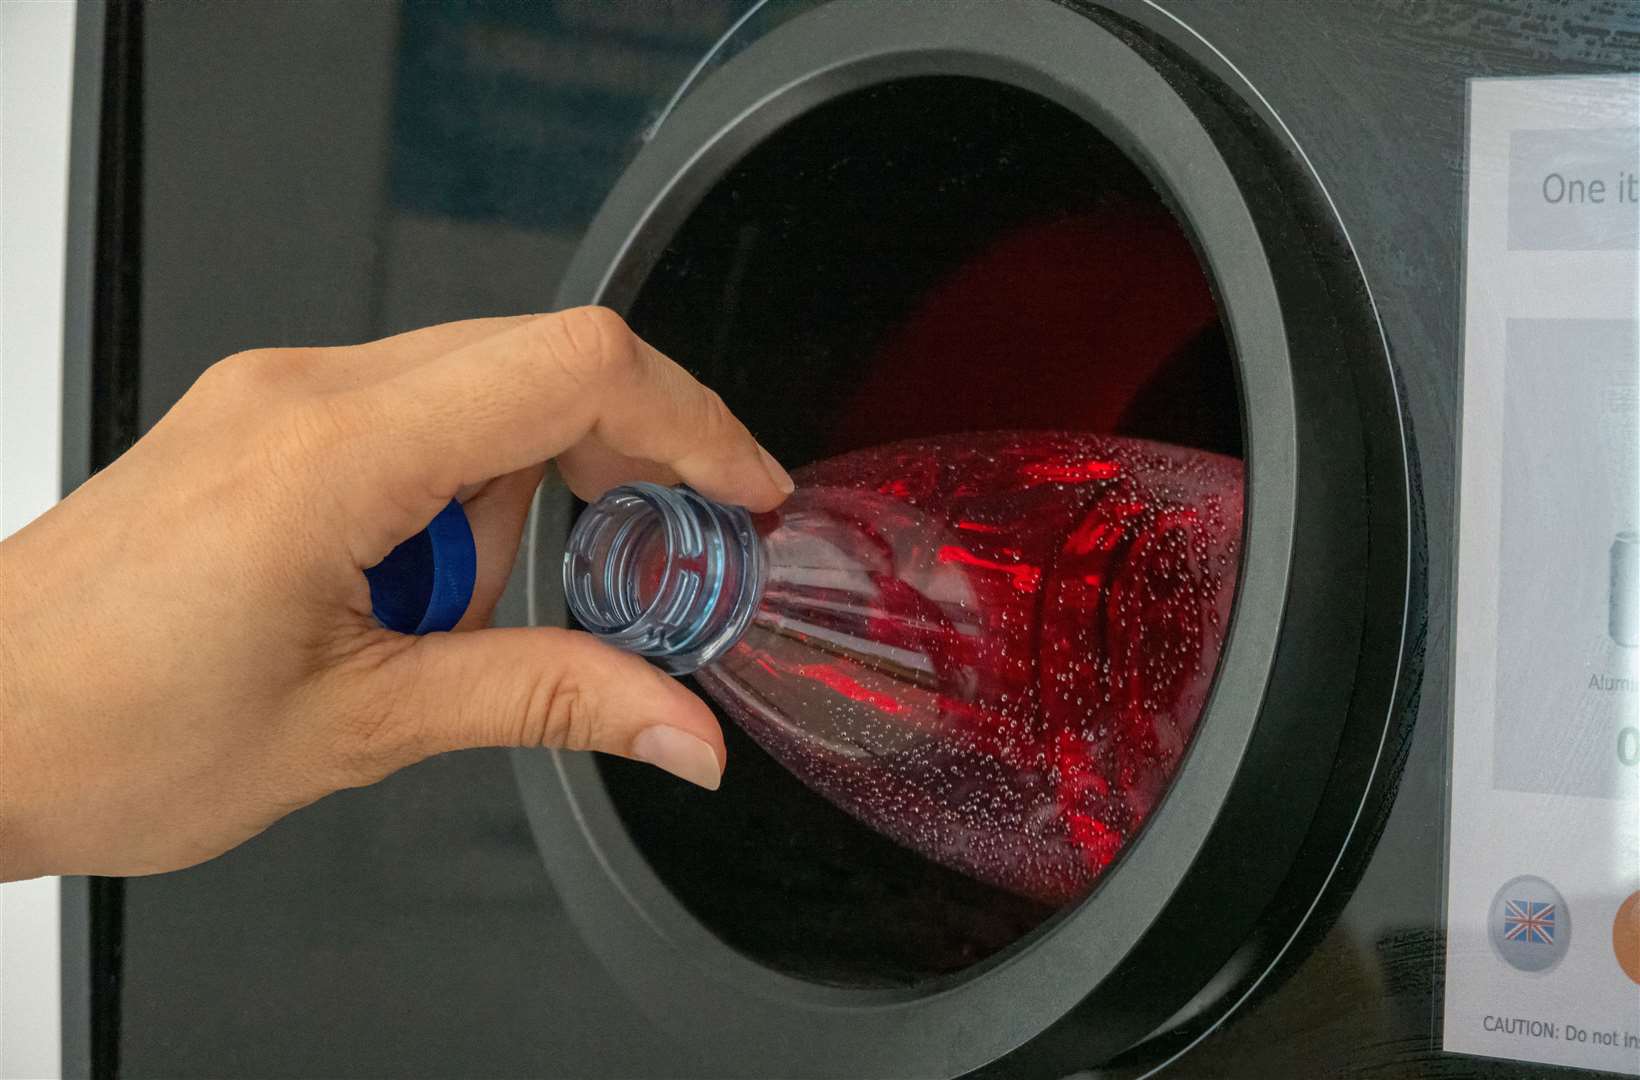 Reverse vending machines are used for Deposit Return Schemes elsewhere.